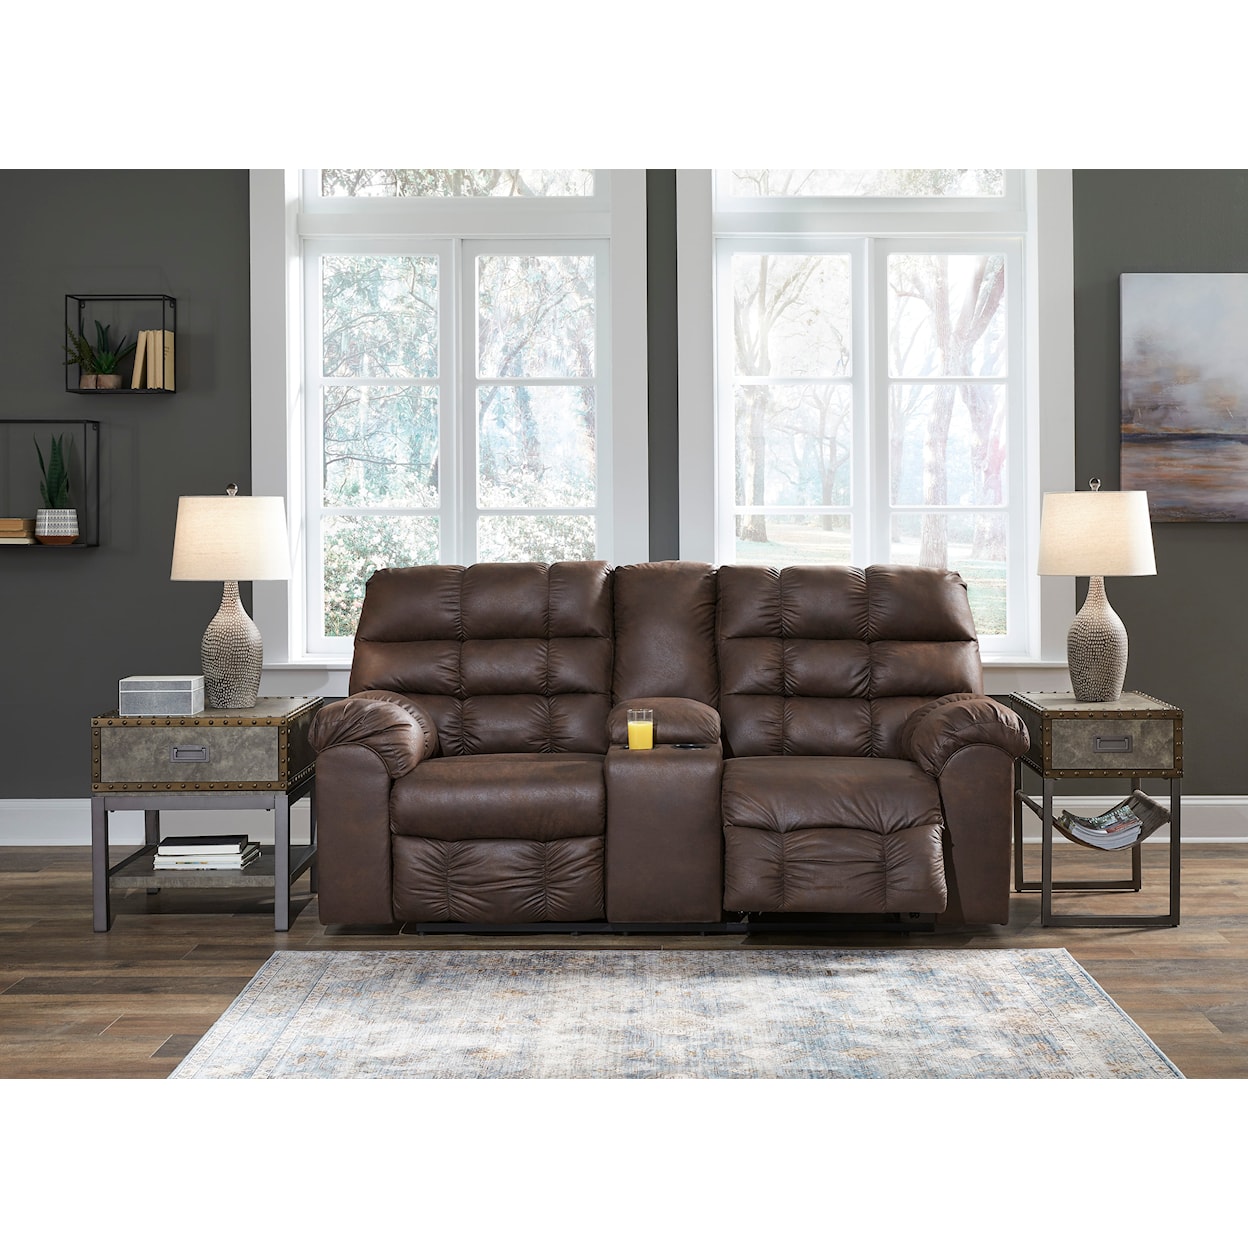 Signature Design by Ashley Furniture Derwin Reclining Loveseat with Console